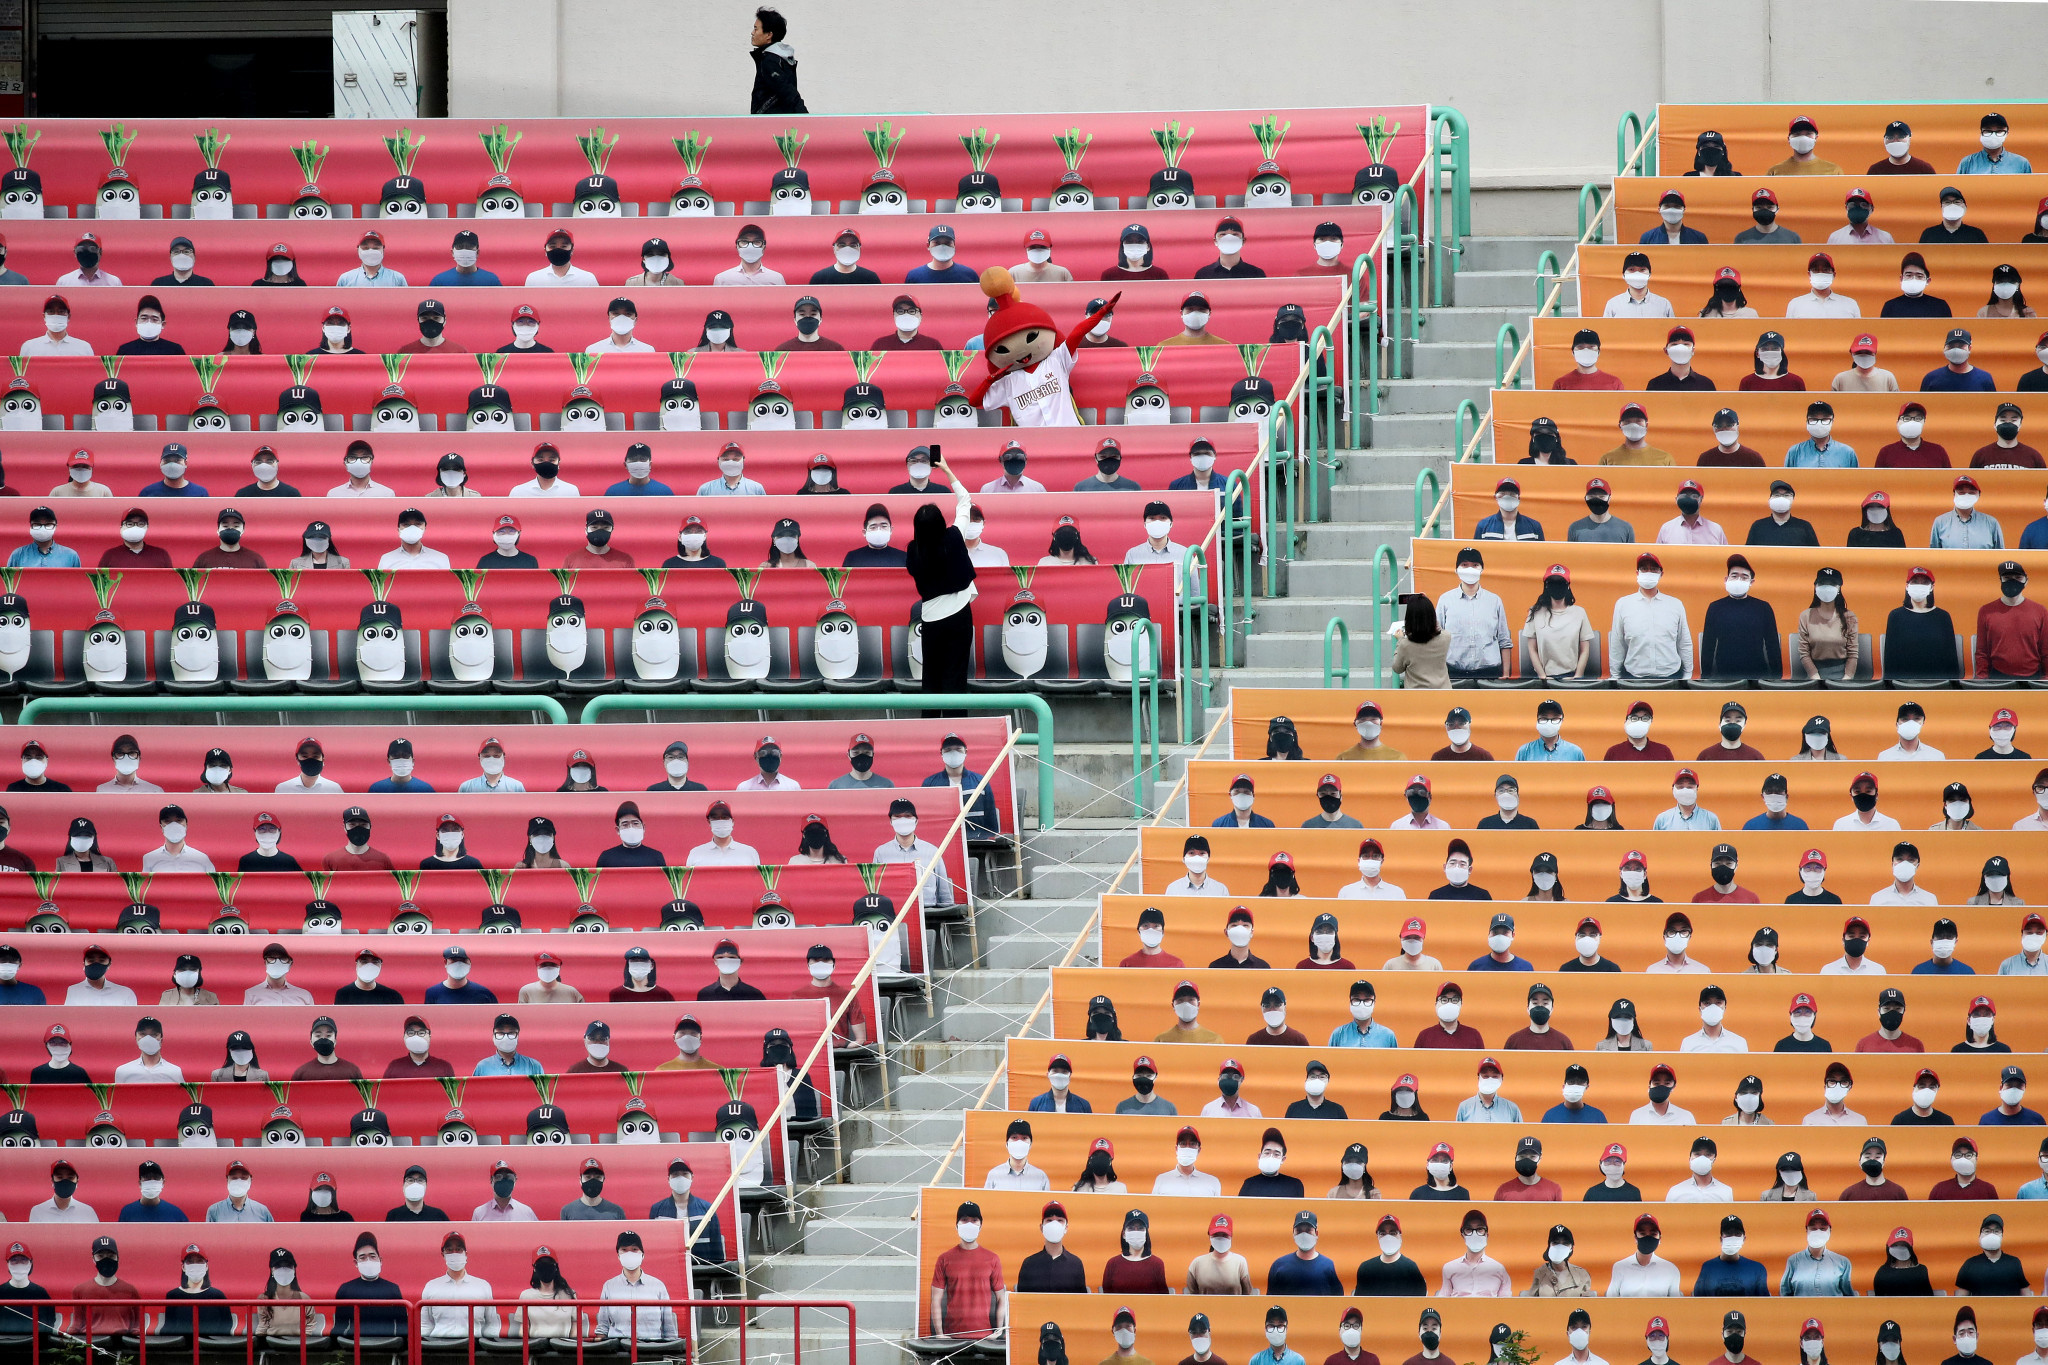 Competition took place in empty stadiums with cardboard cut-outs of fans installed ©Getty Images